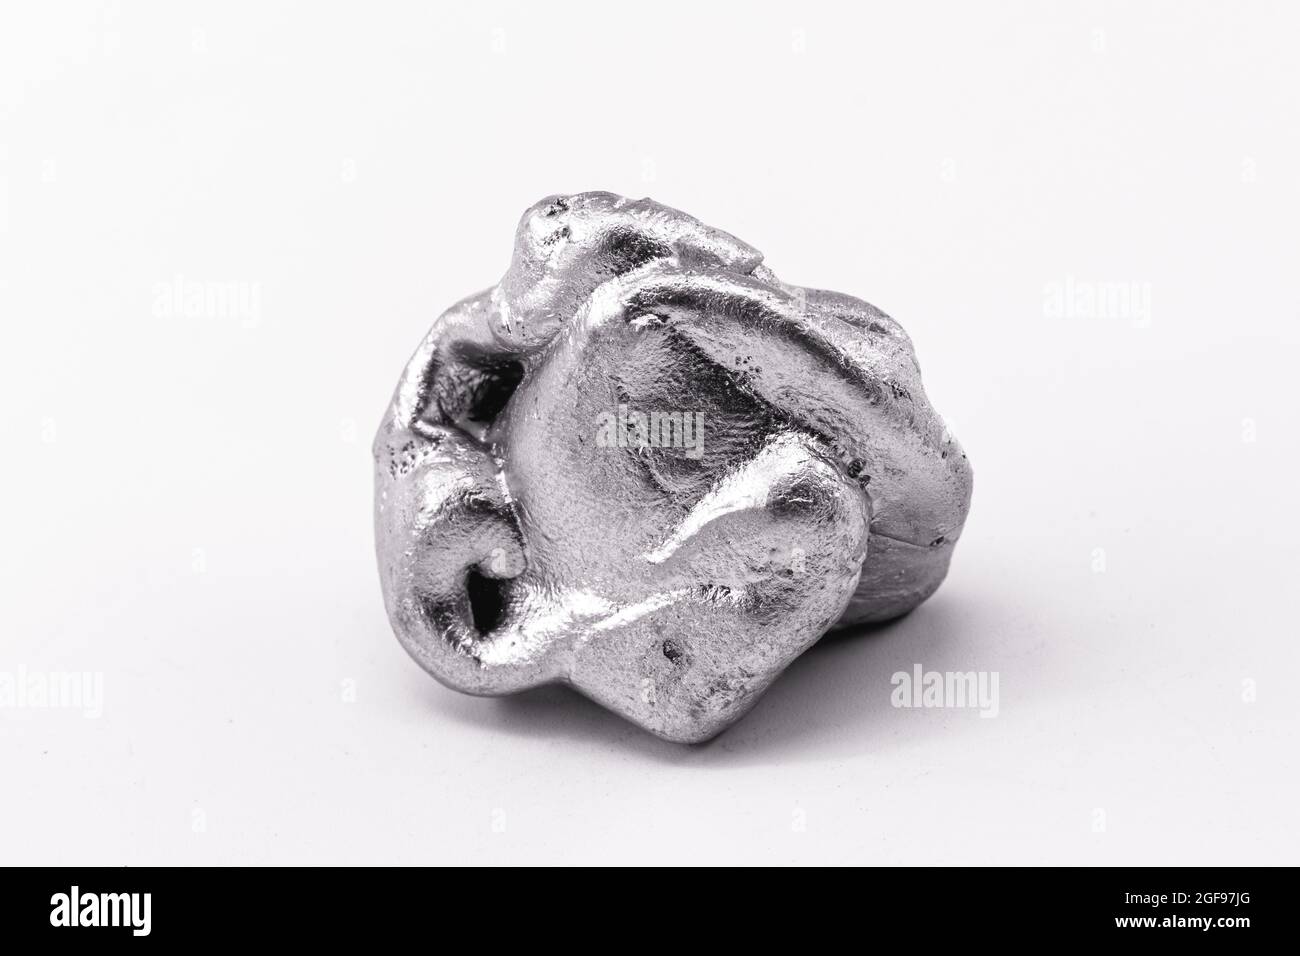 Nickel is a chemical element, resulting from the combination of arsenic, antimony or sulfur. Stock Photo